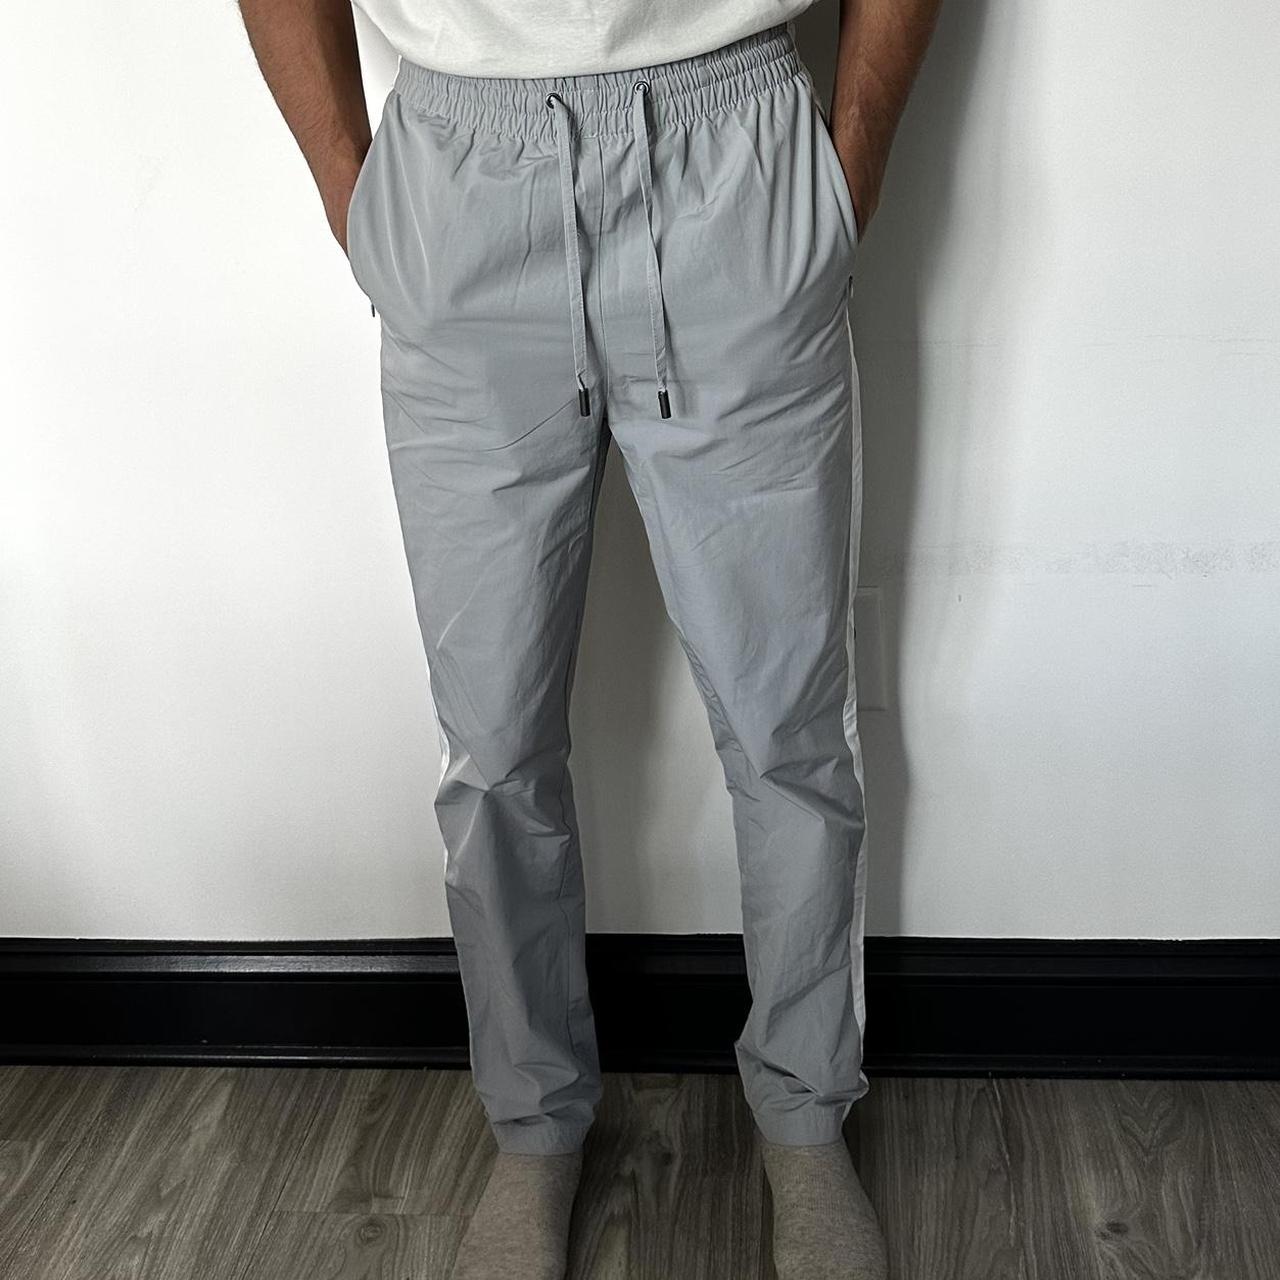 Native Youth Men's Grey and White Trousers